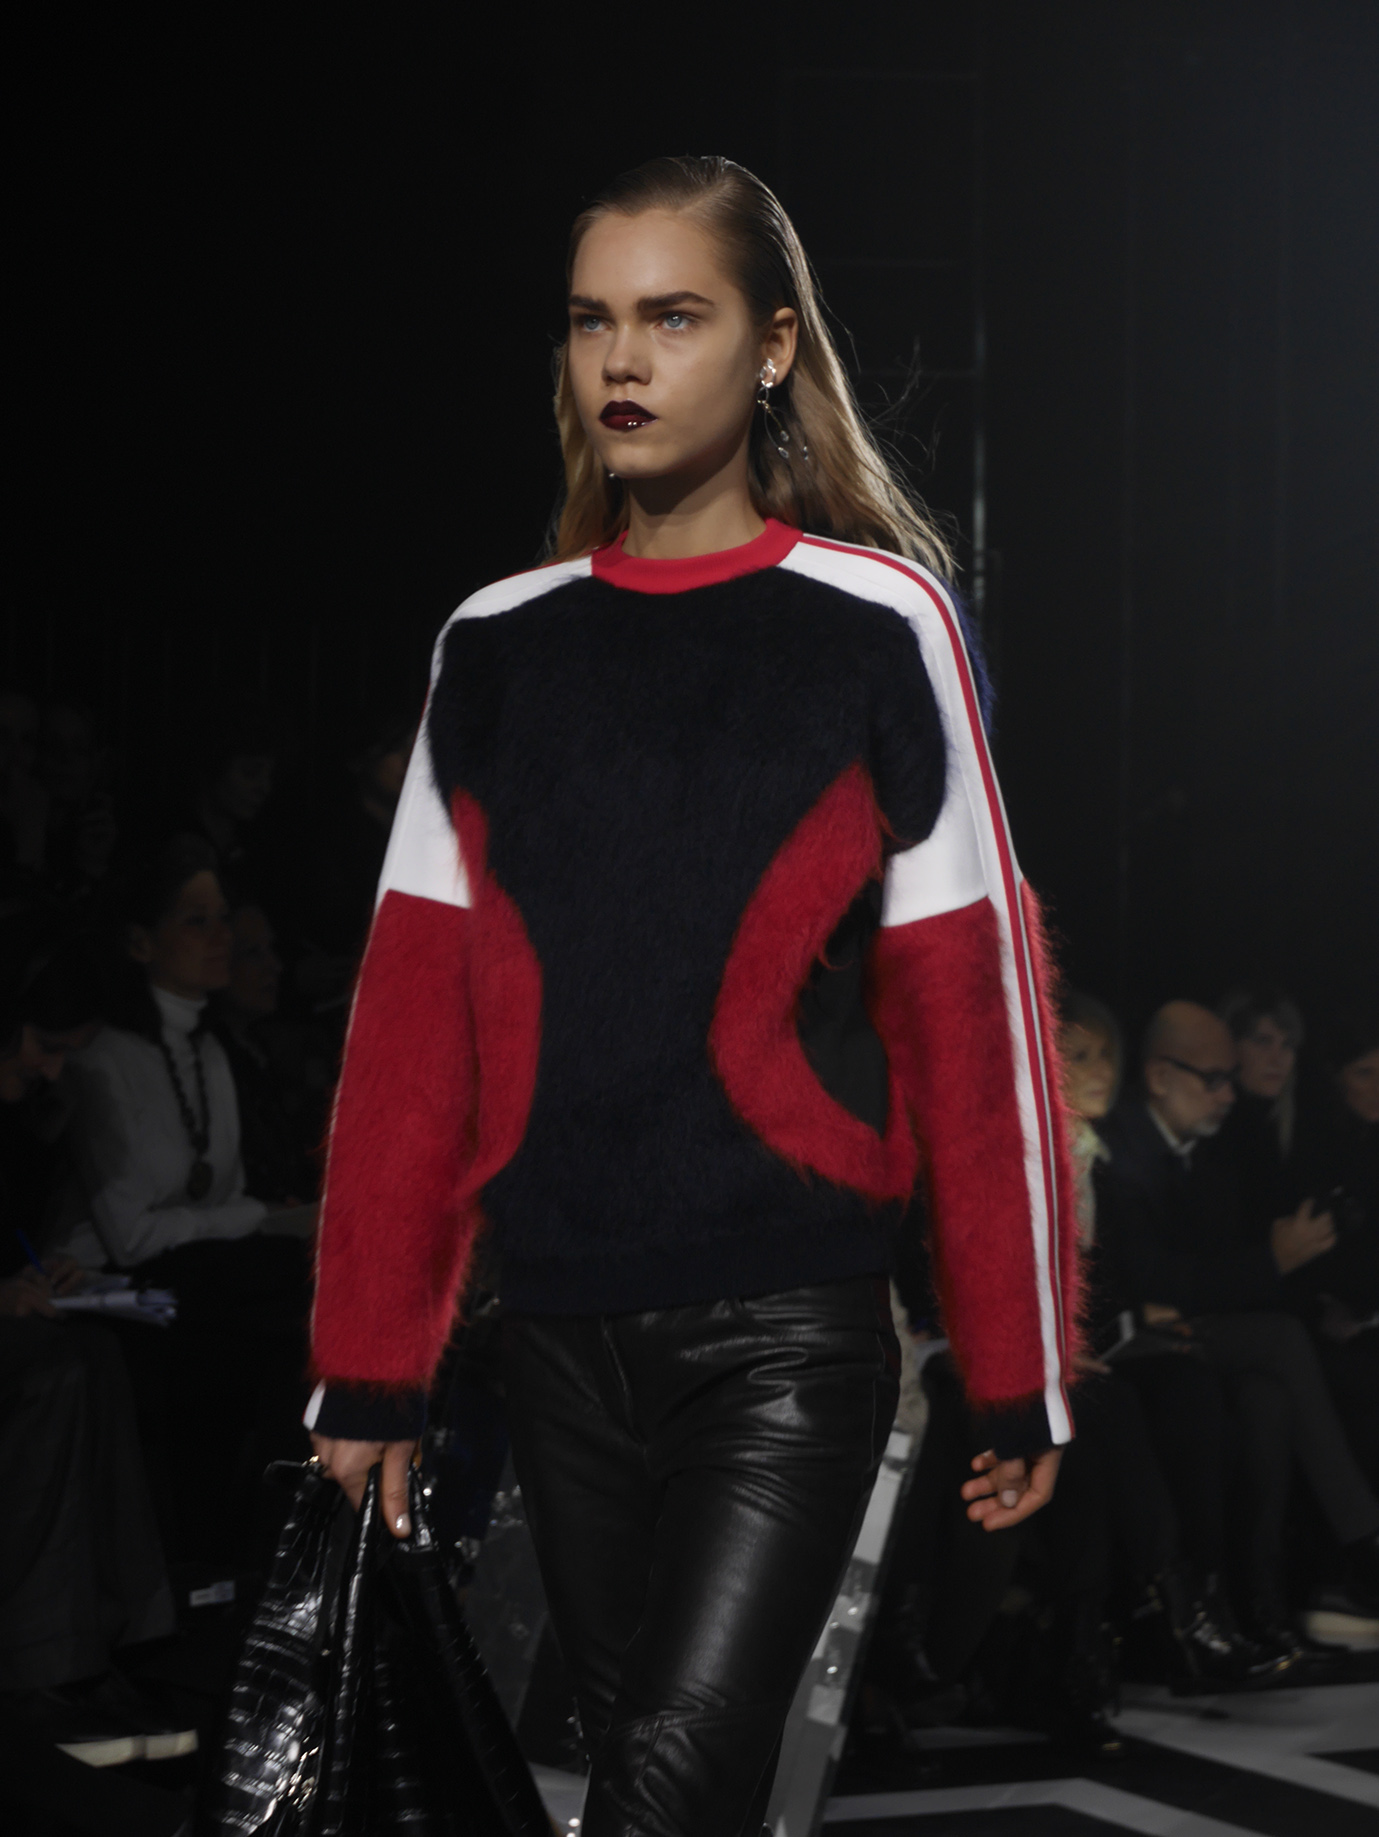 New York Fashion Week Fall/Winter 2016-2017: oversize and edgy - LVMH